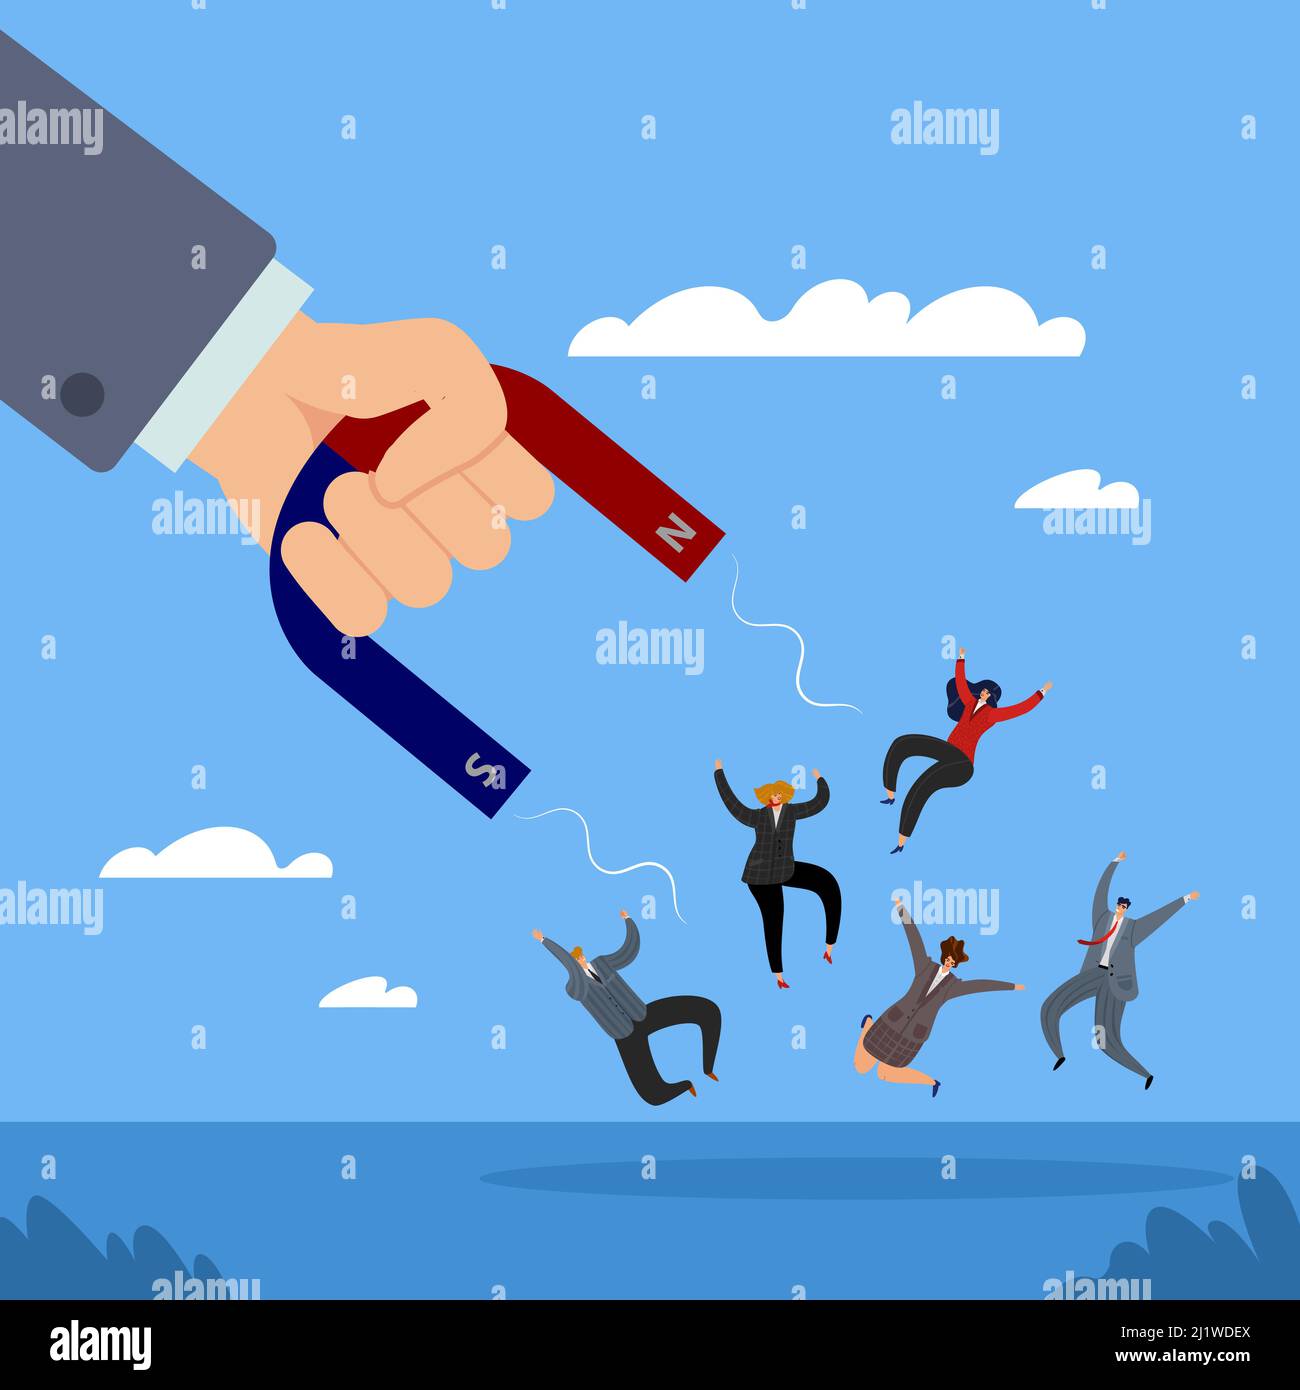 Attracting staff. Human resource recruiting candidates or talents. Hiring clients or new customers, attract electorate. Hand hold huge magnet Stock Vector